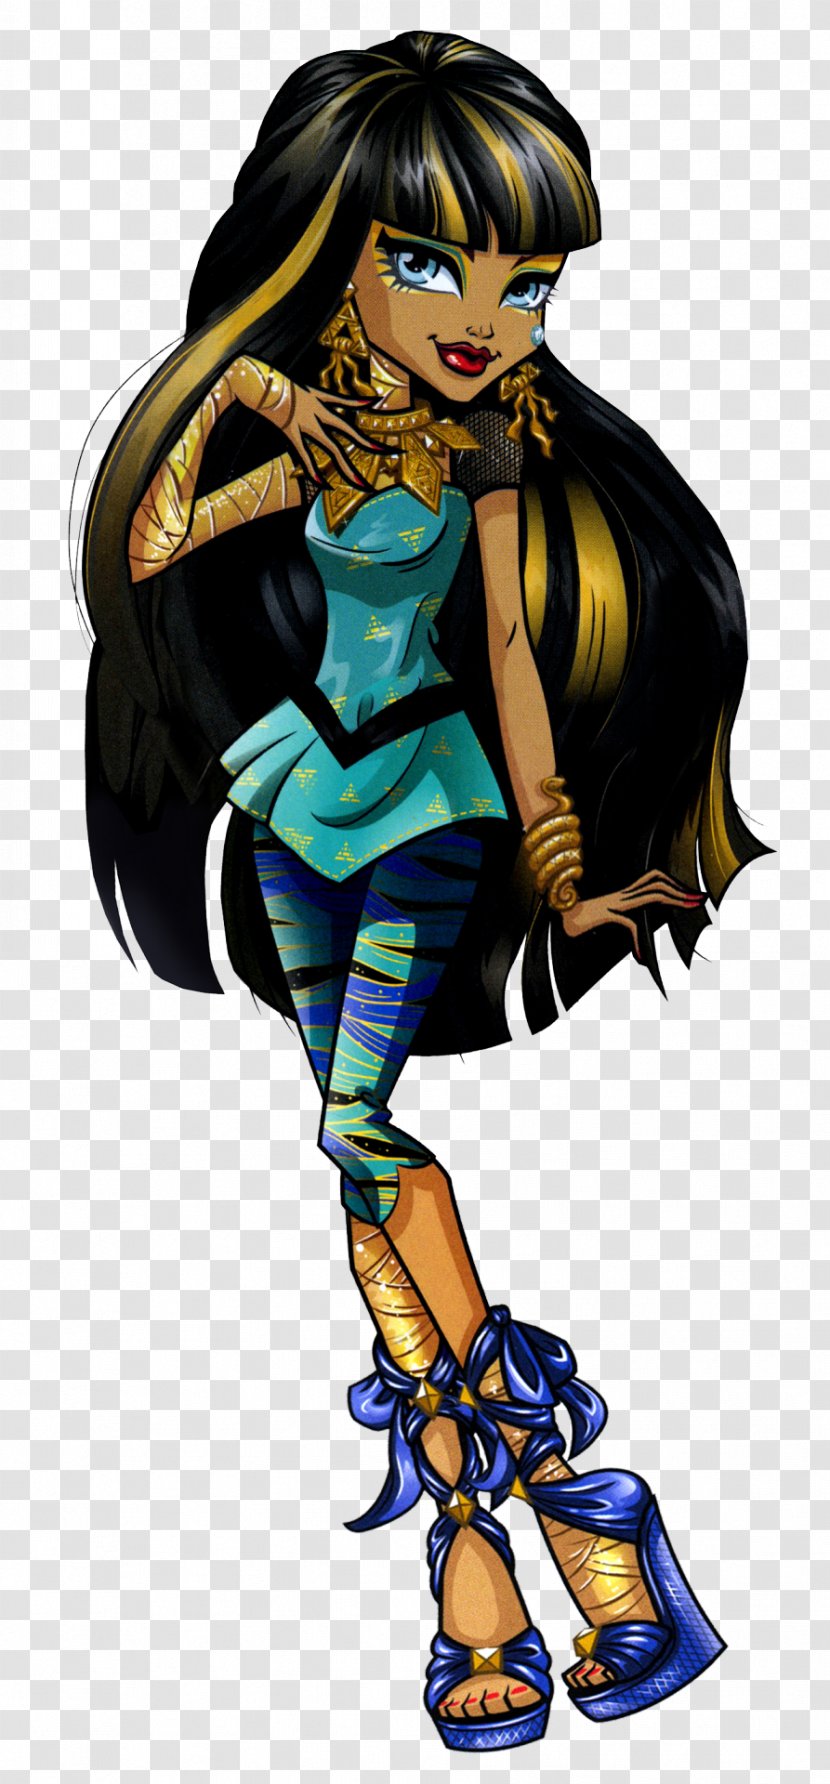 Cleo DeNile Monster High De Nile Clawdeen Wolf Frankie Stein - Watercolor - Doll Transparent PNG